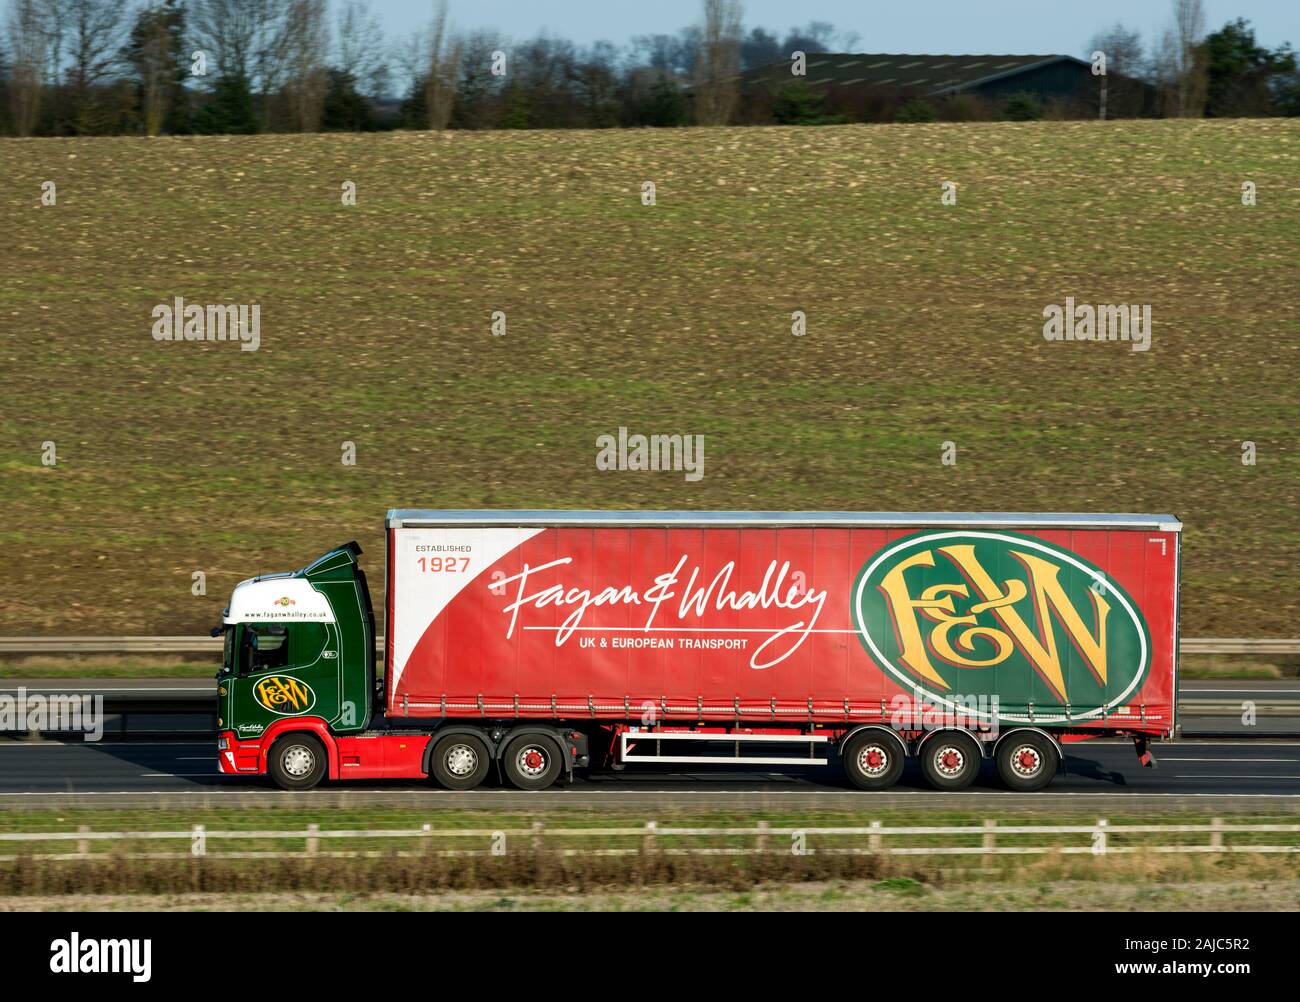 Fagan and Whalley lorry on the M40 motorway, Warwickshire, UK Stock Photo